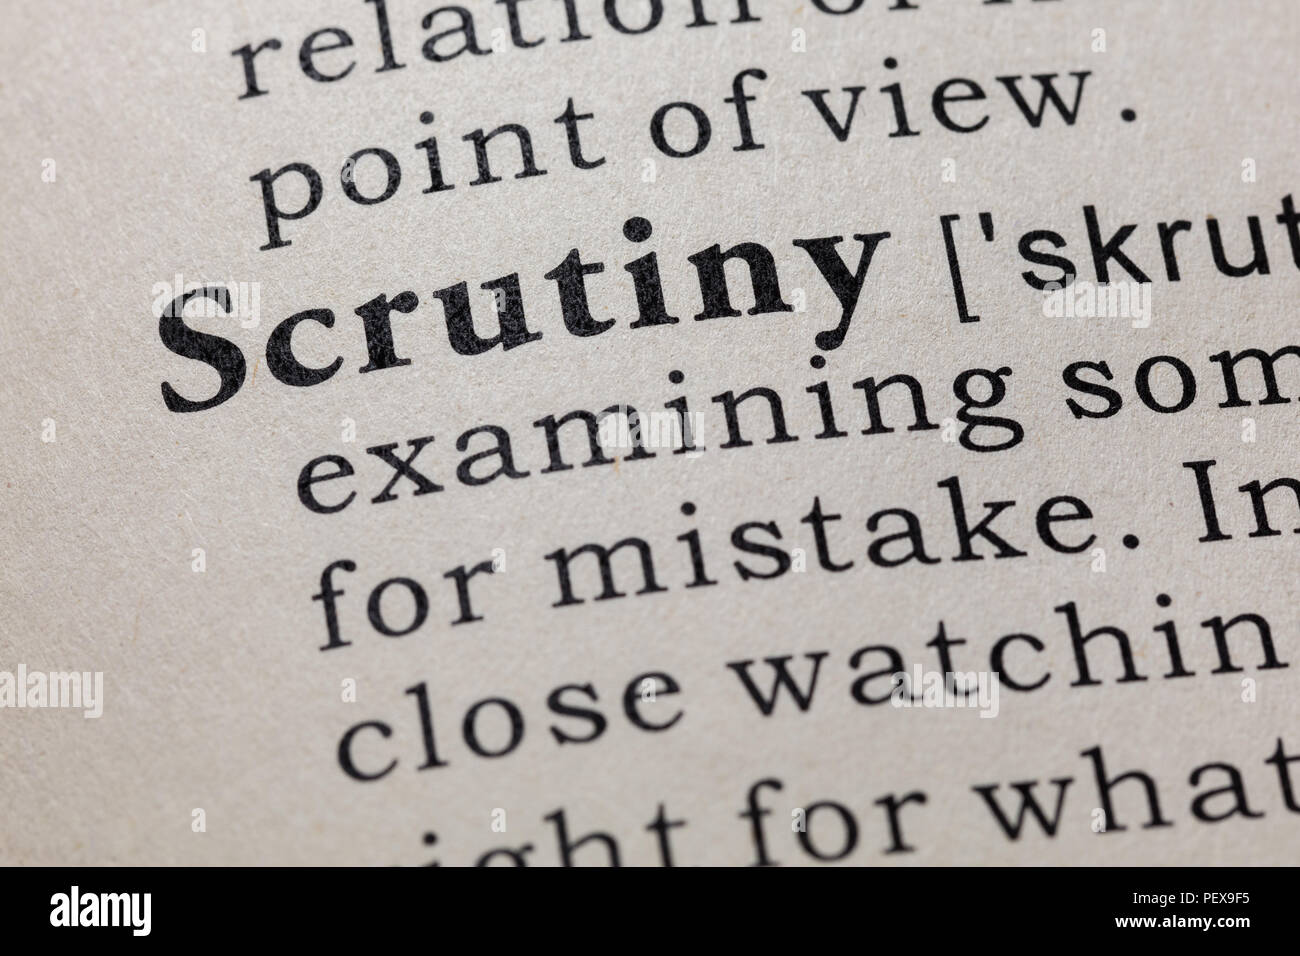 Fake Dictionary, Dictionary definition of the word scrutiny. including key descriptive words. Stock Photo